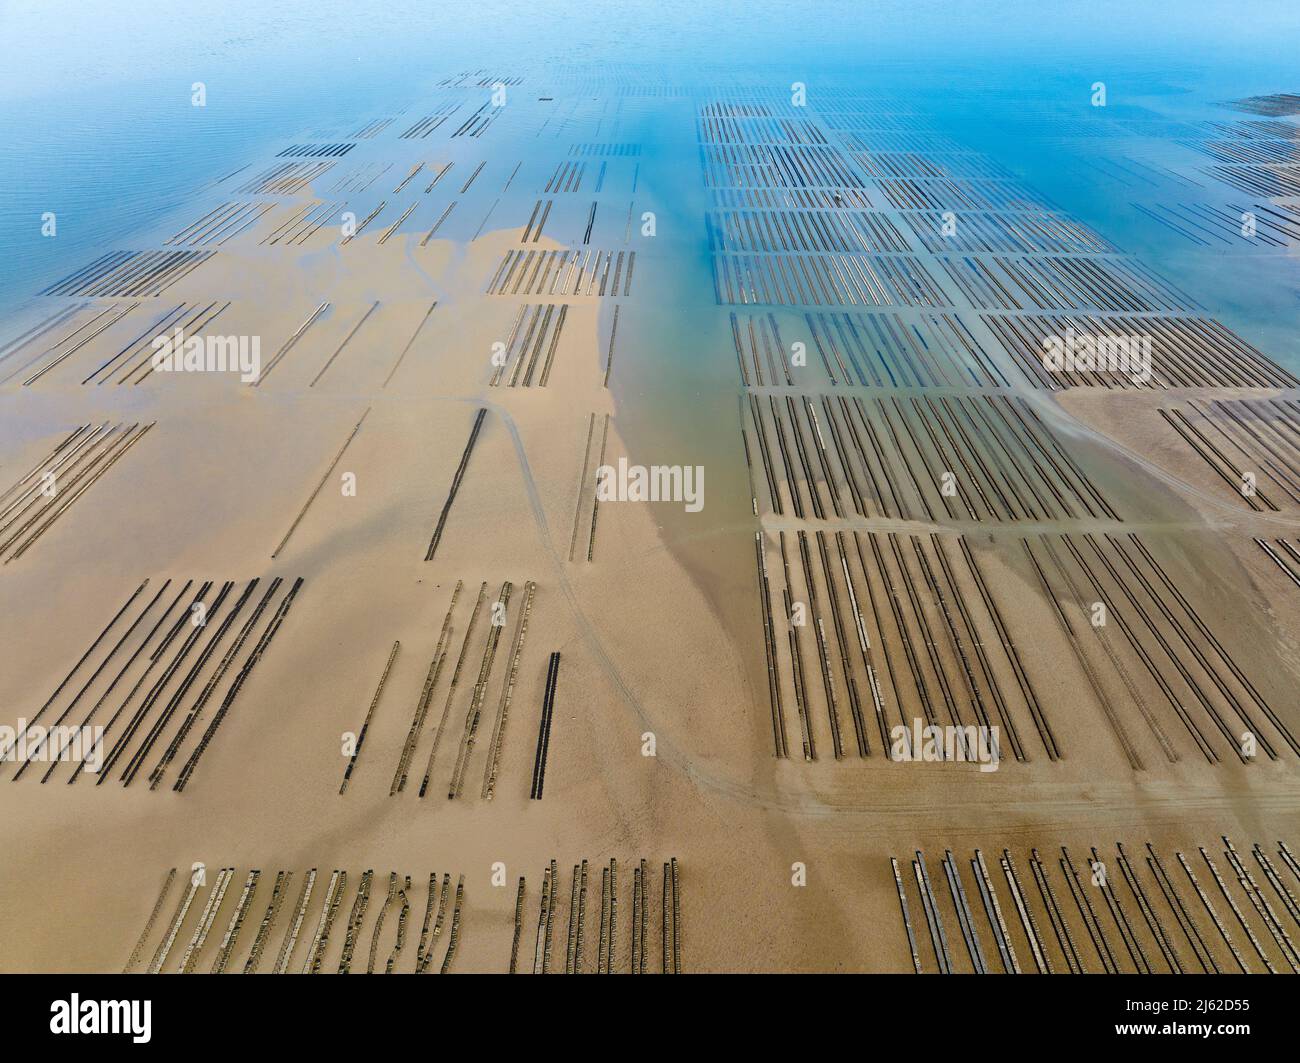 Oyster farming at Grandcamp Maisy, Normandy, aerial view Stock Photo